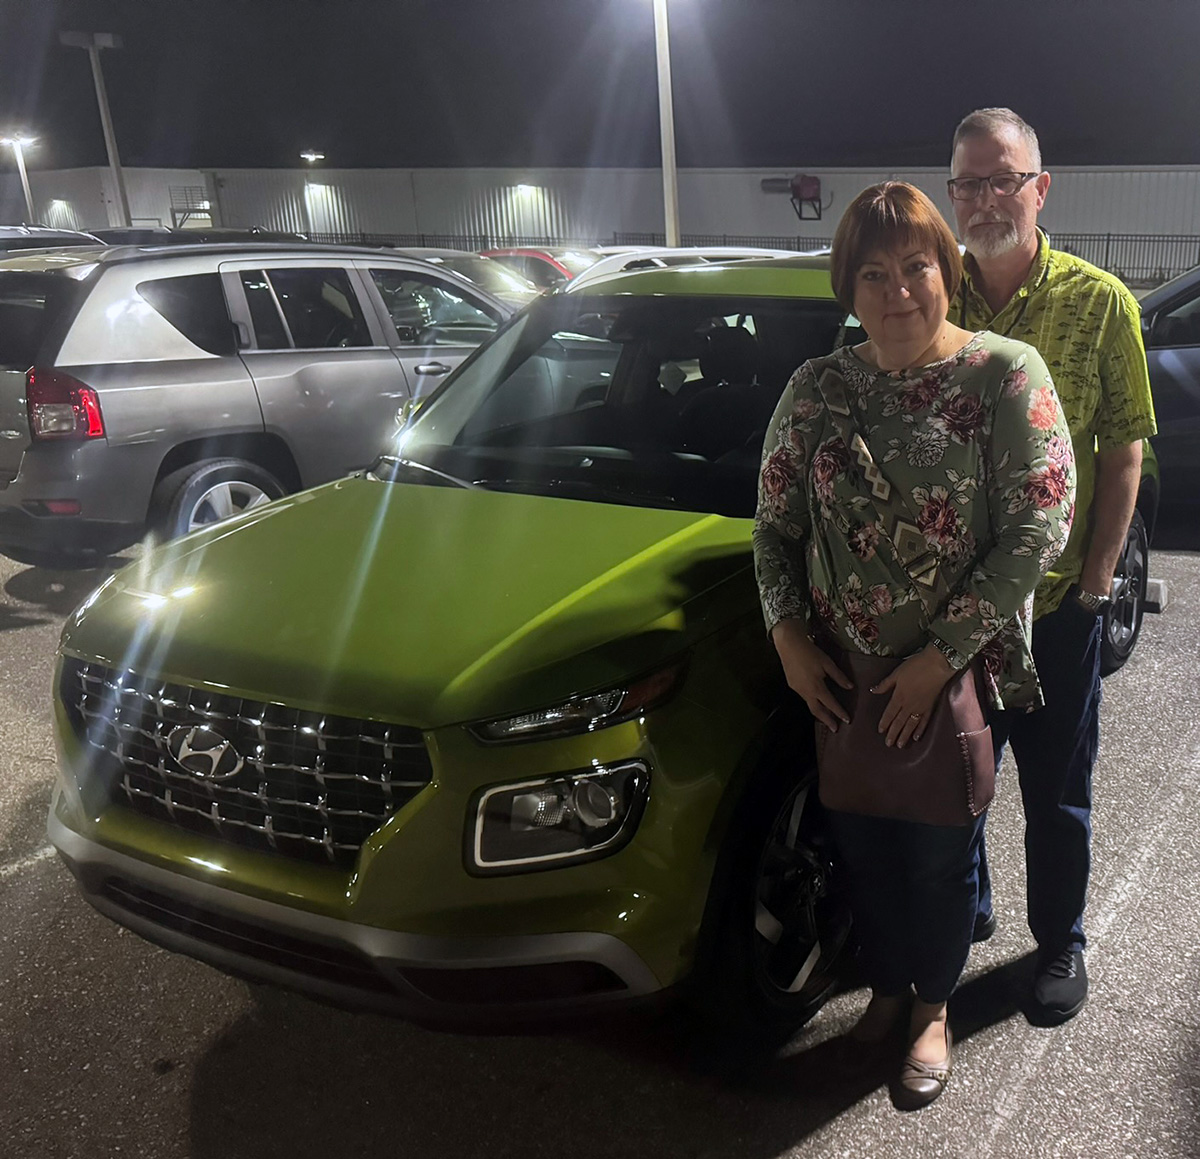 We get it, getting a #GreatDeal on a #NewSUV is what everyone is looking for & when the Bwoens came to #LakelandAutomall, we made sure #GreatService was also included. #LookingGood & #ThankYou for choosing us for your purchase. #Enjoy & if we can do anything, we're here for you!